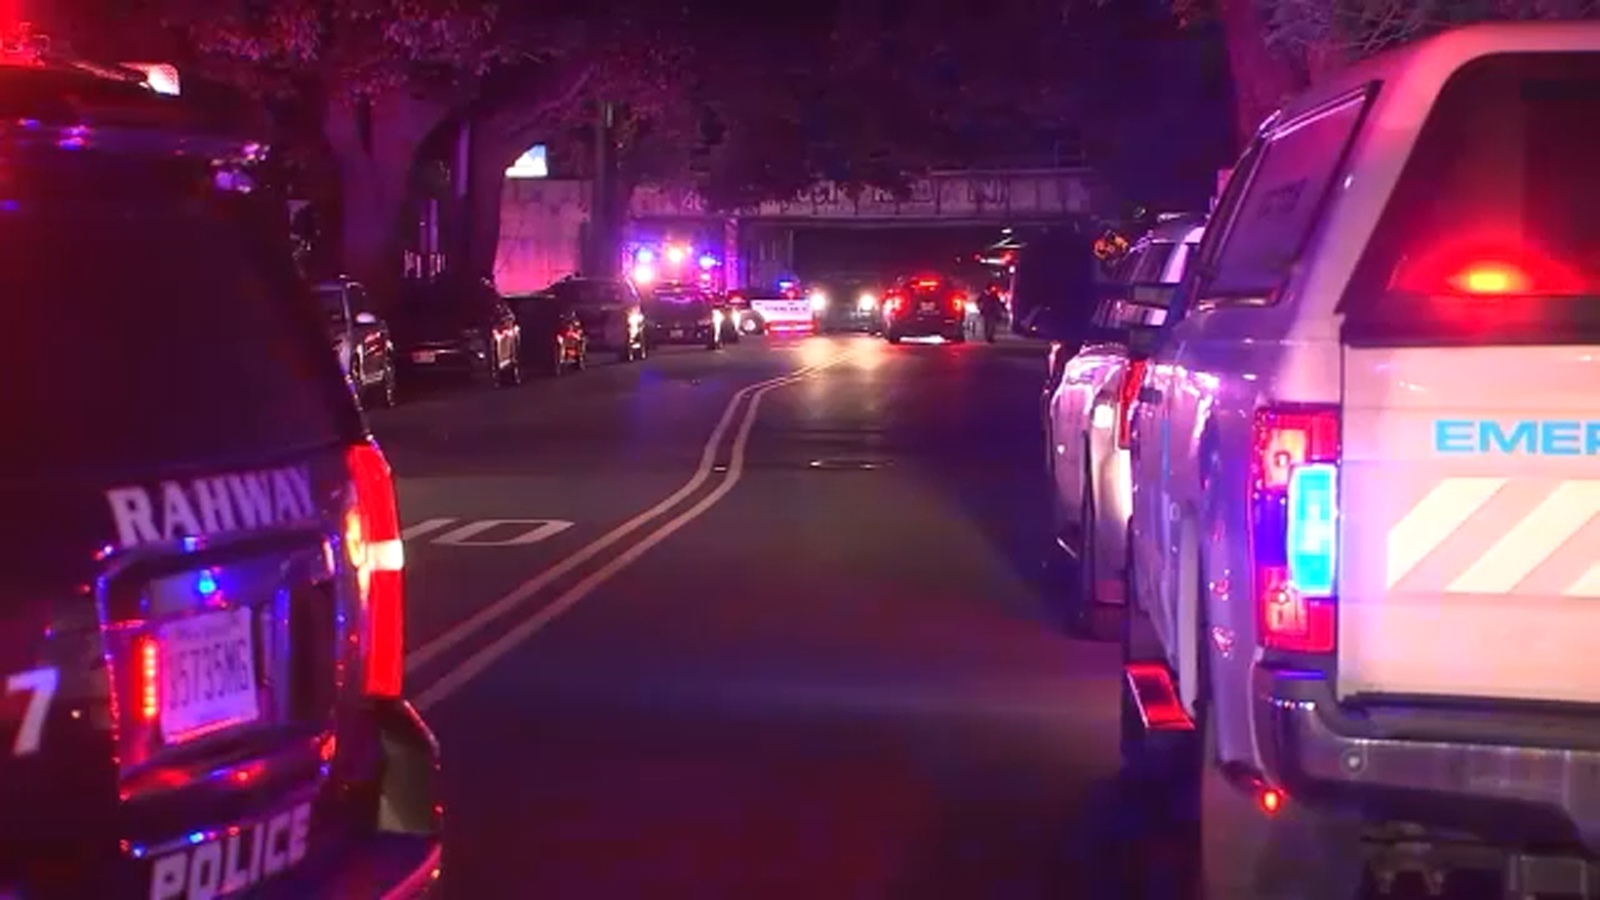 Police officer injured in shooting in Rahway, New Jersey [Video]